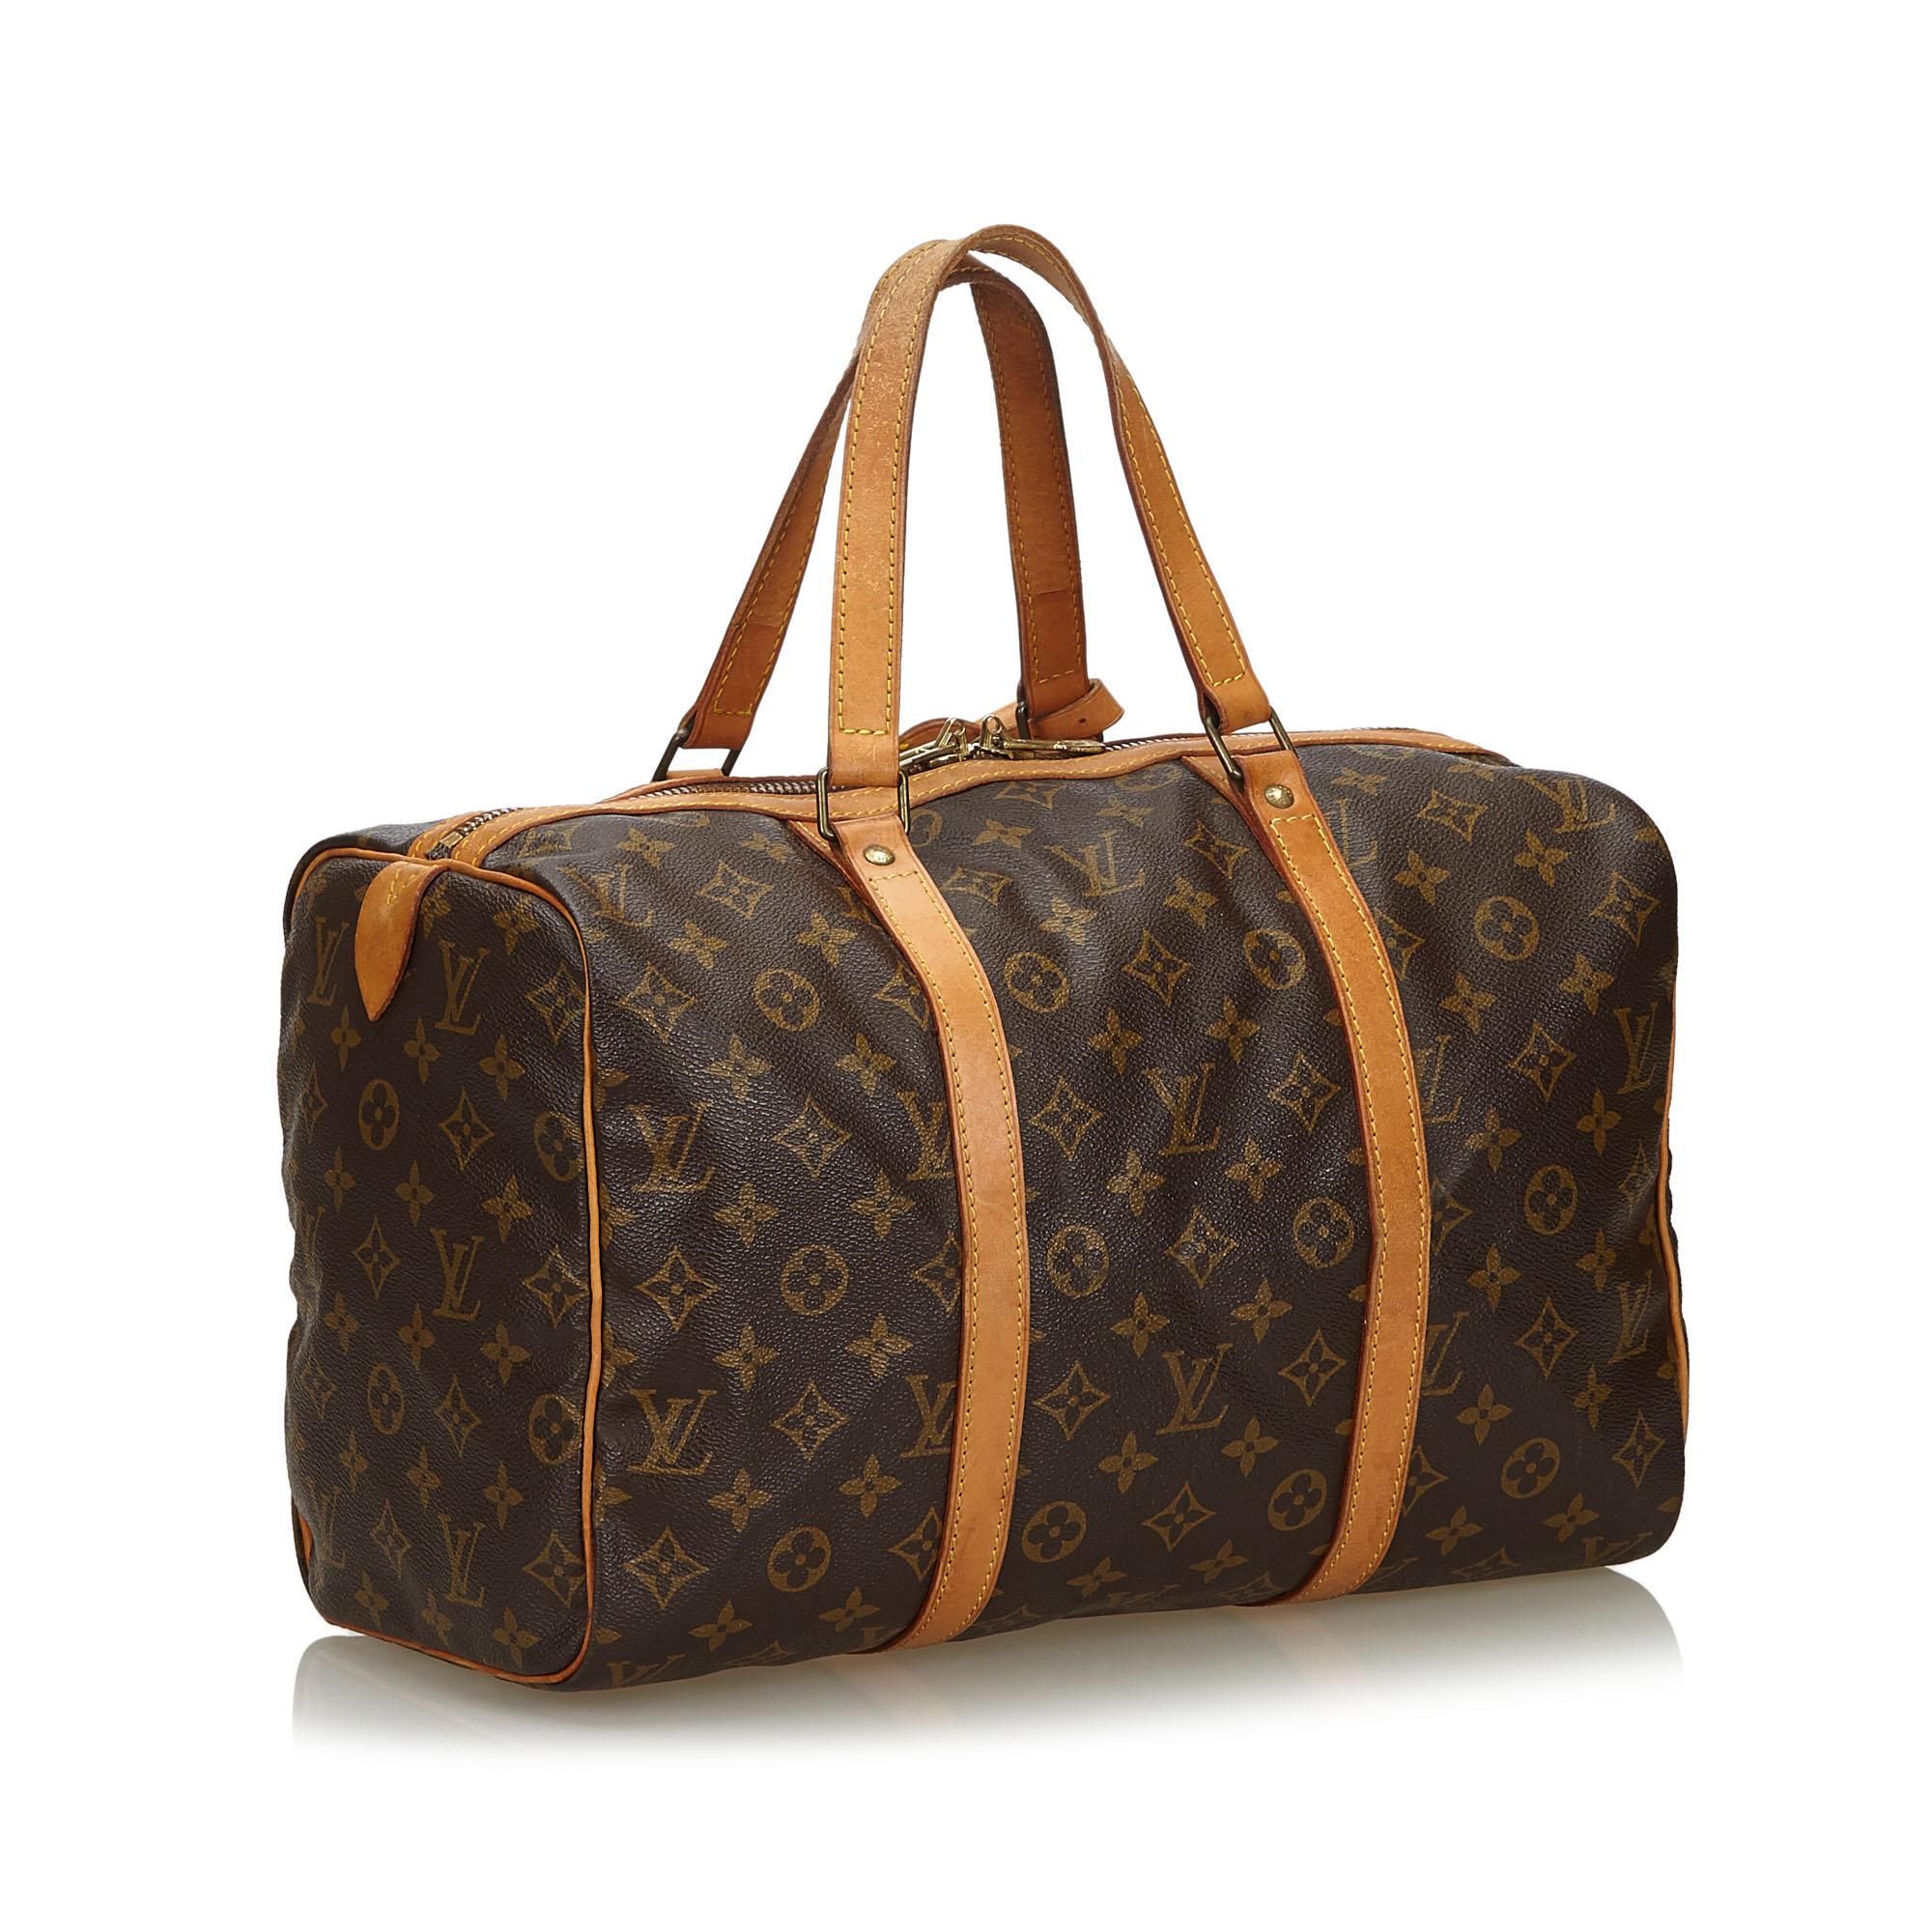 The Sac Souple 35 features a monogram canvas body, flat leather straps, and a top zip closure. It carries as B condition rating.

Inclusions: 
This item does not come with inclusions.


Louis Vuitton pieces do not come with an authenticity card